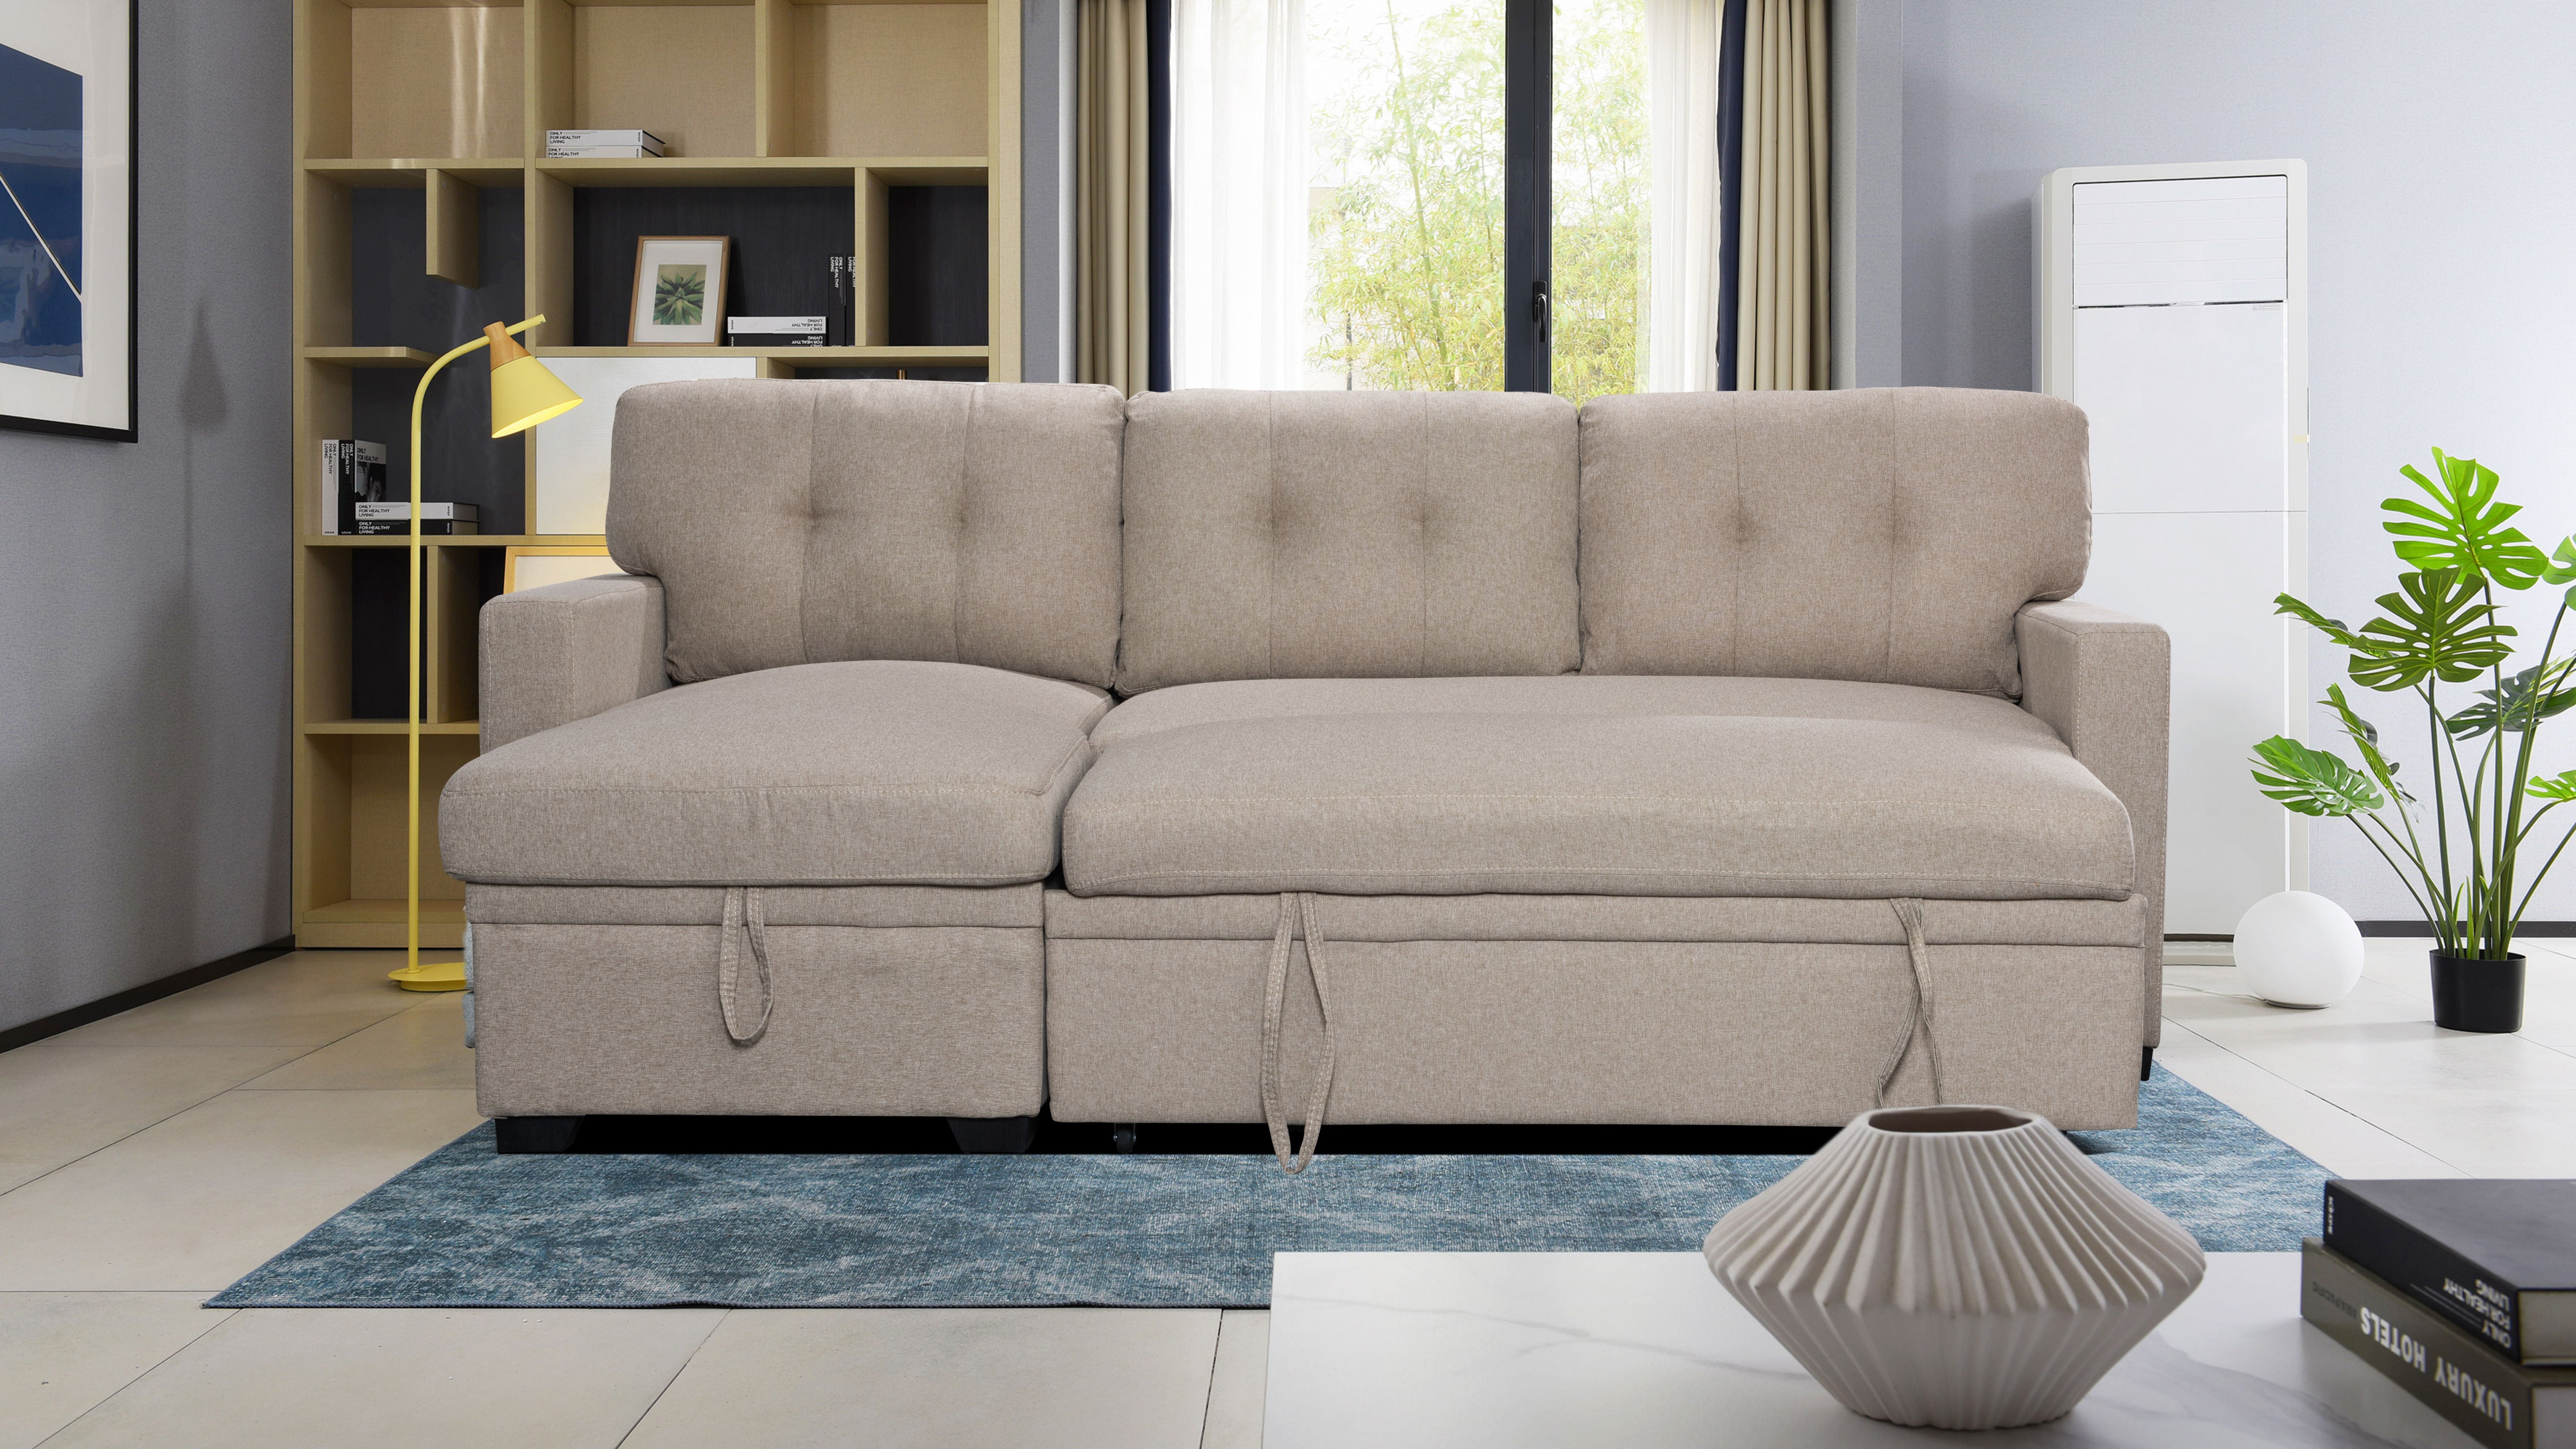 Miller - Linen Reversible Sleeper Sectional Sofa With Storage Chaise